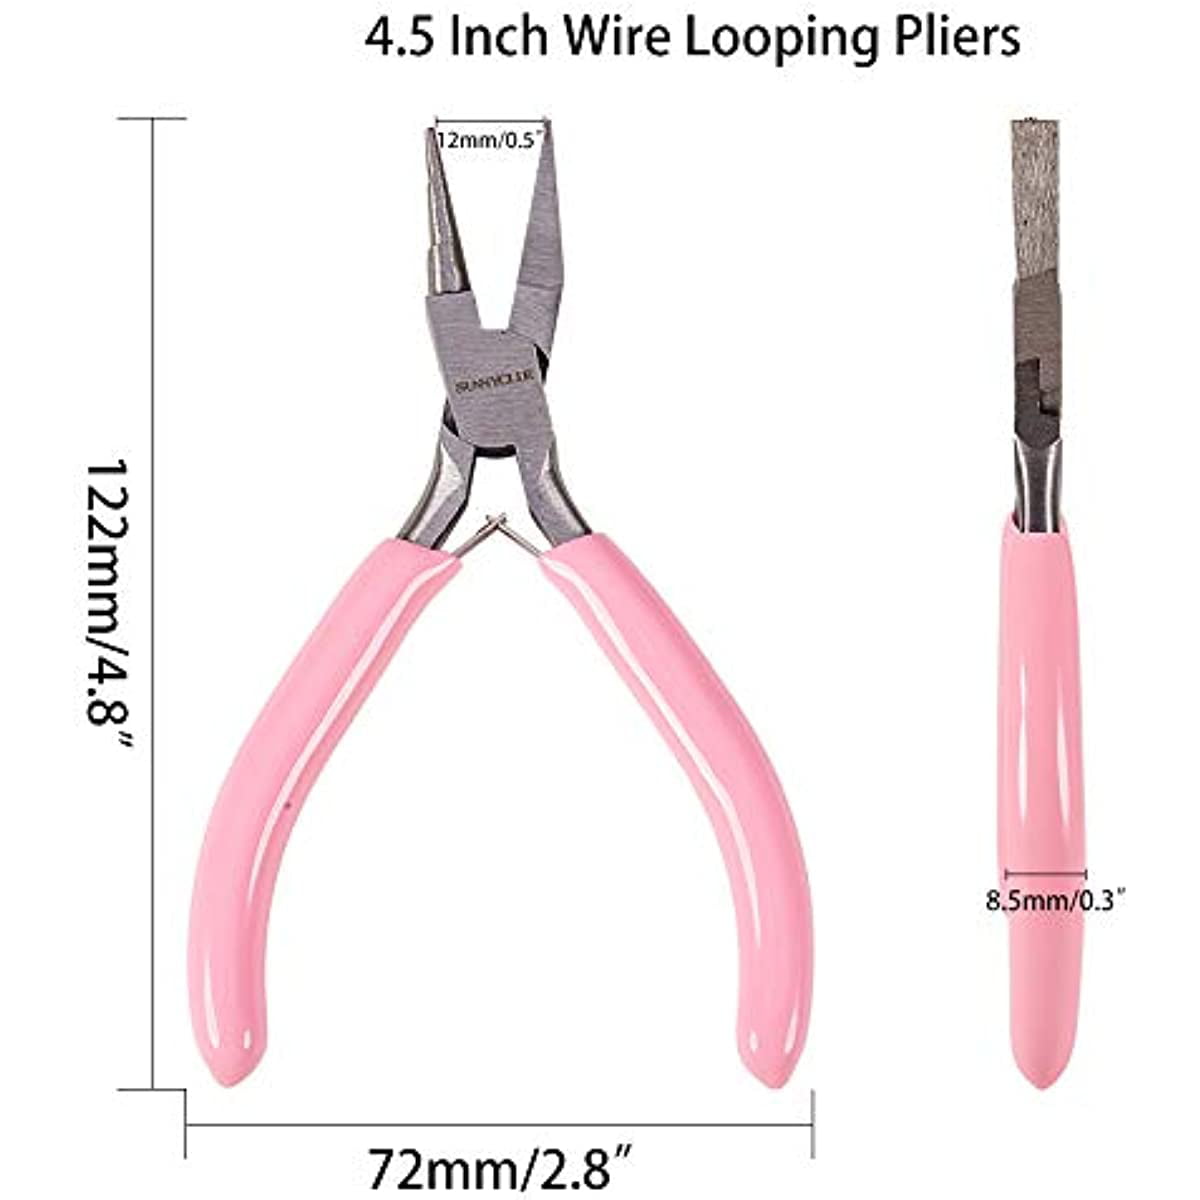 anna 4inch Round Concave Plier Wire Looping Pliers Precision